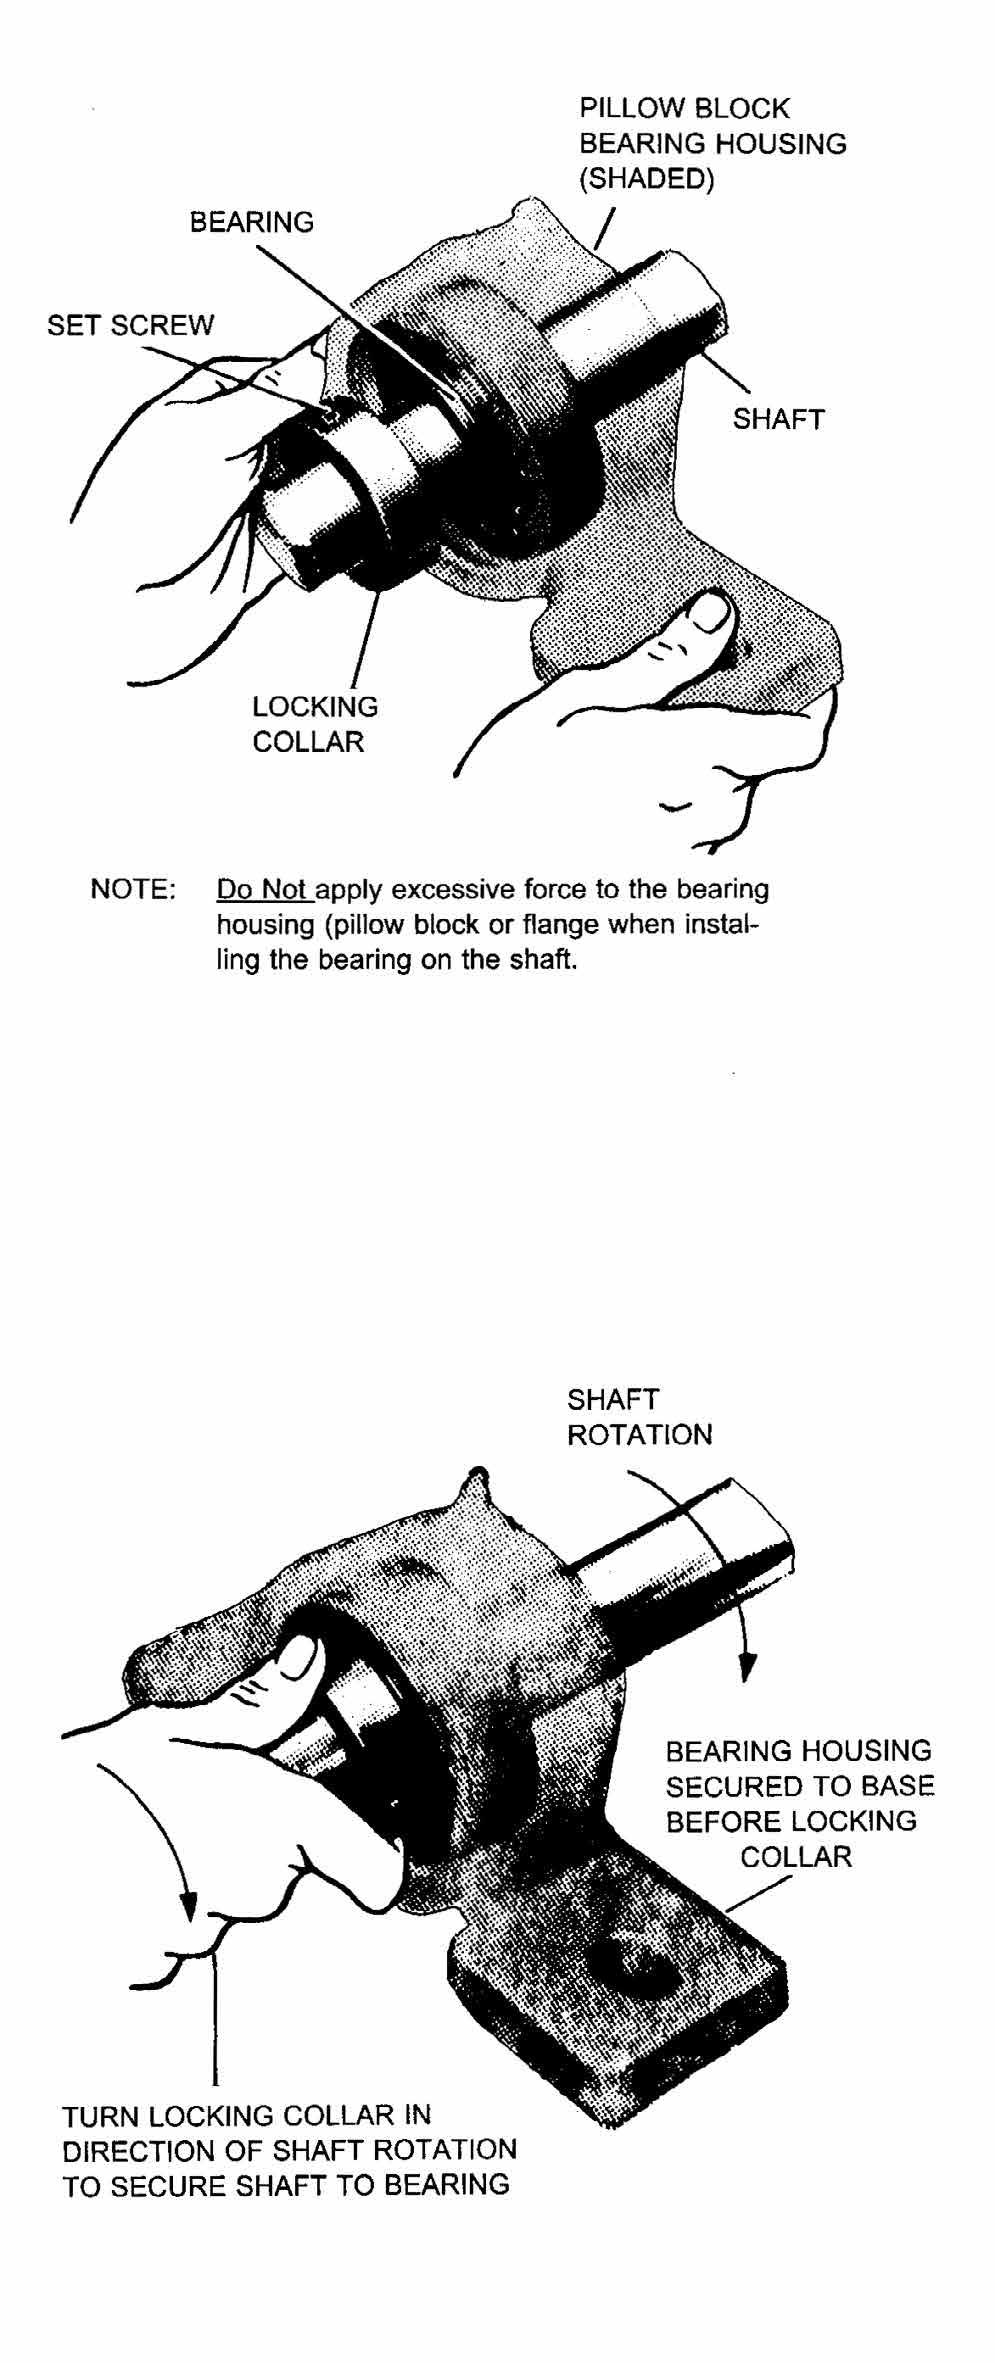 SECTION 4 MAINTENANCE FORM 100.50-NOM6 When the eccentric collar is engaged to the cam on the bearing inner ring and turned in direction of rotation, it grips the shaft with a positive binding action.